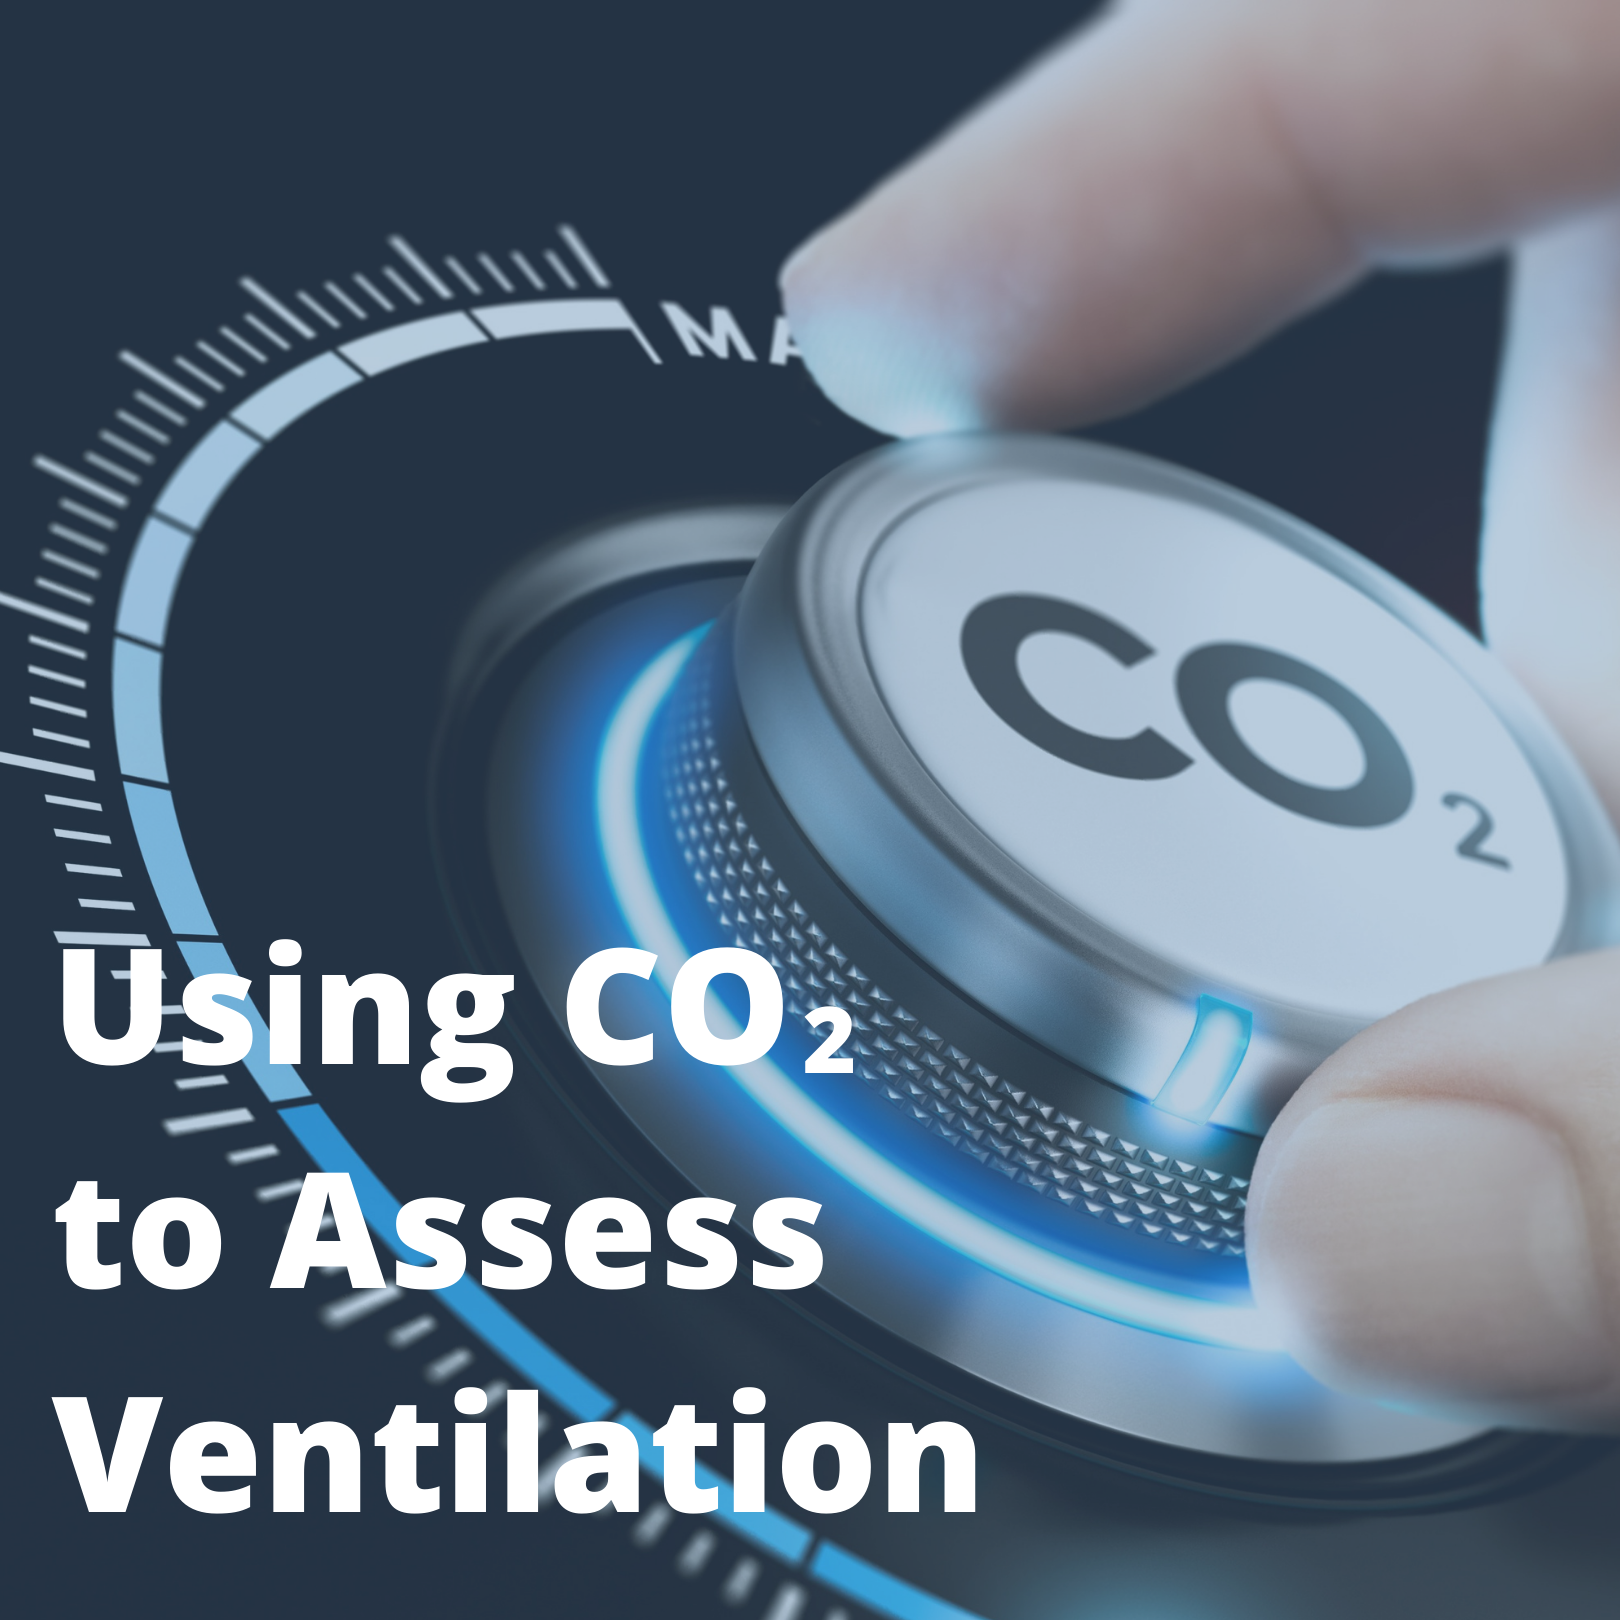 Using CO2 to Assess Ventilation